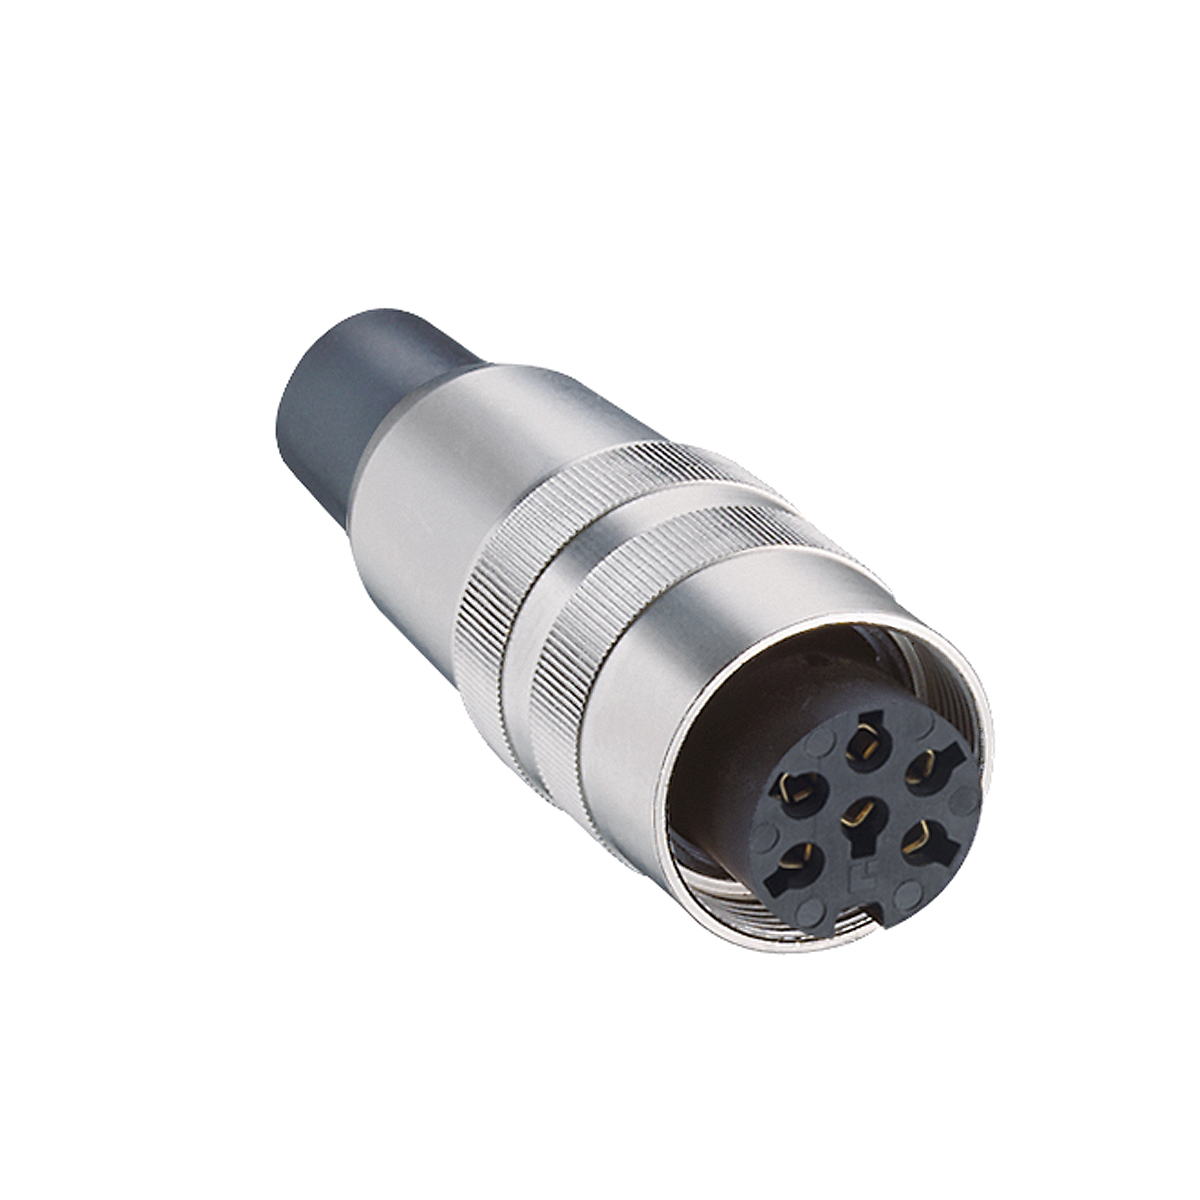 Lumberg: KV ...-8 (Series 03 | Circular connectors with threaded joint M16 acc. to IEC 61076-2-106, IP40/IP68)